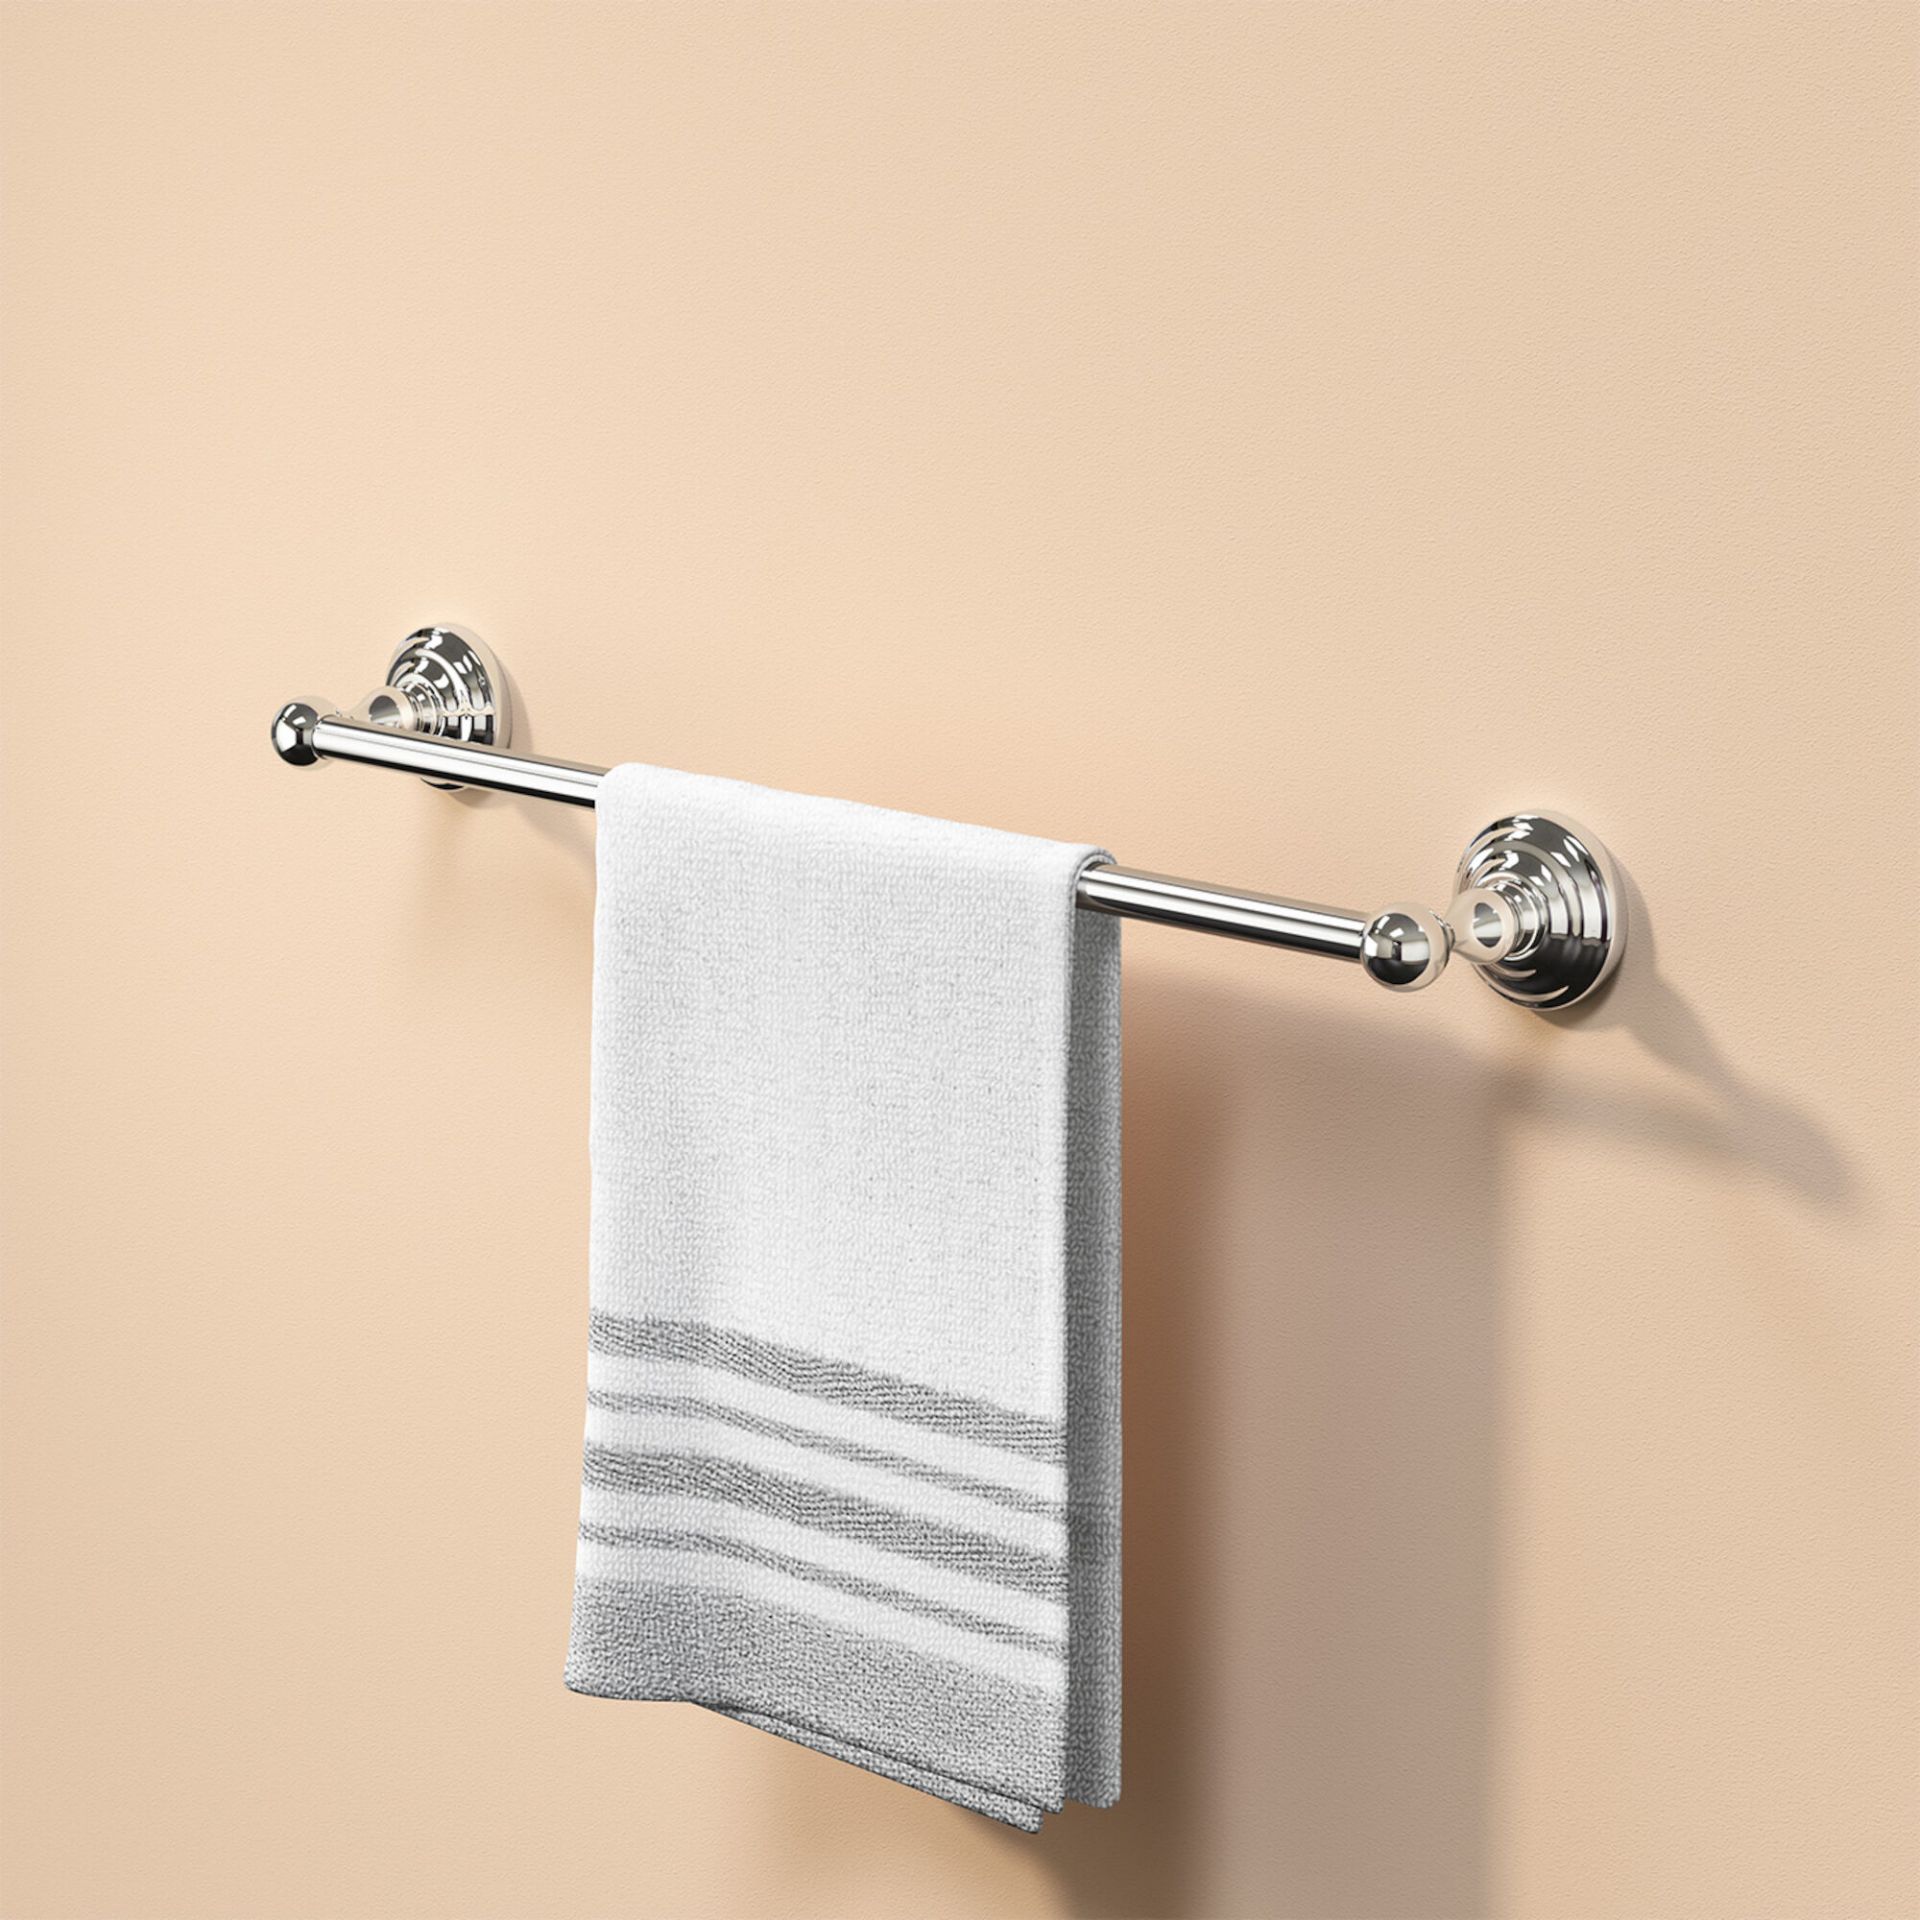 (NF113) York Towel Hanger Rail Finishes your bathroom with a little extra functionality and style